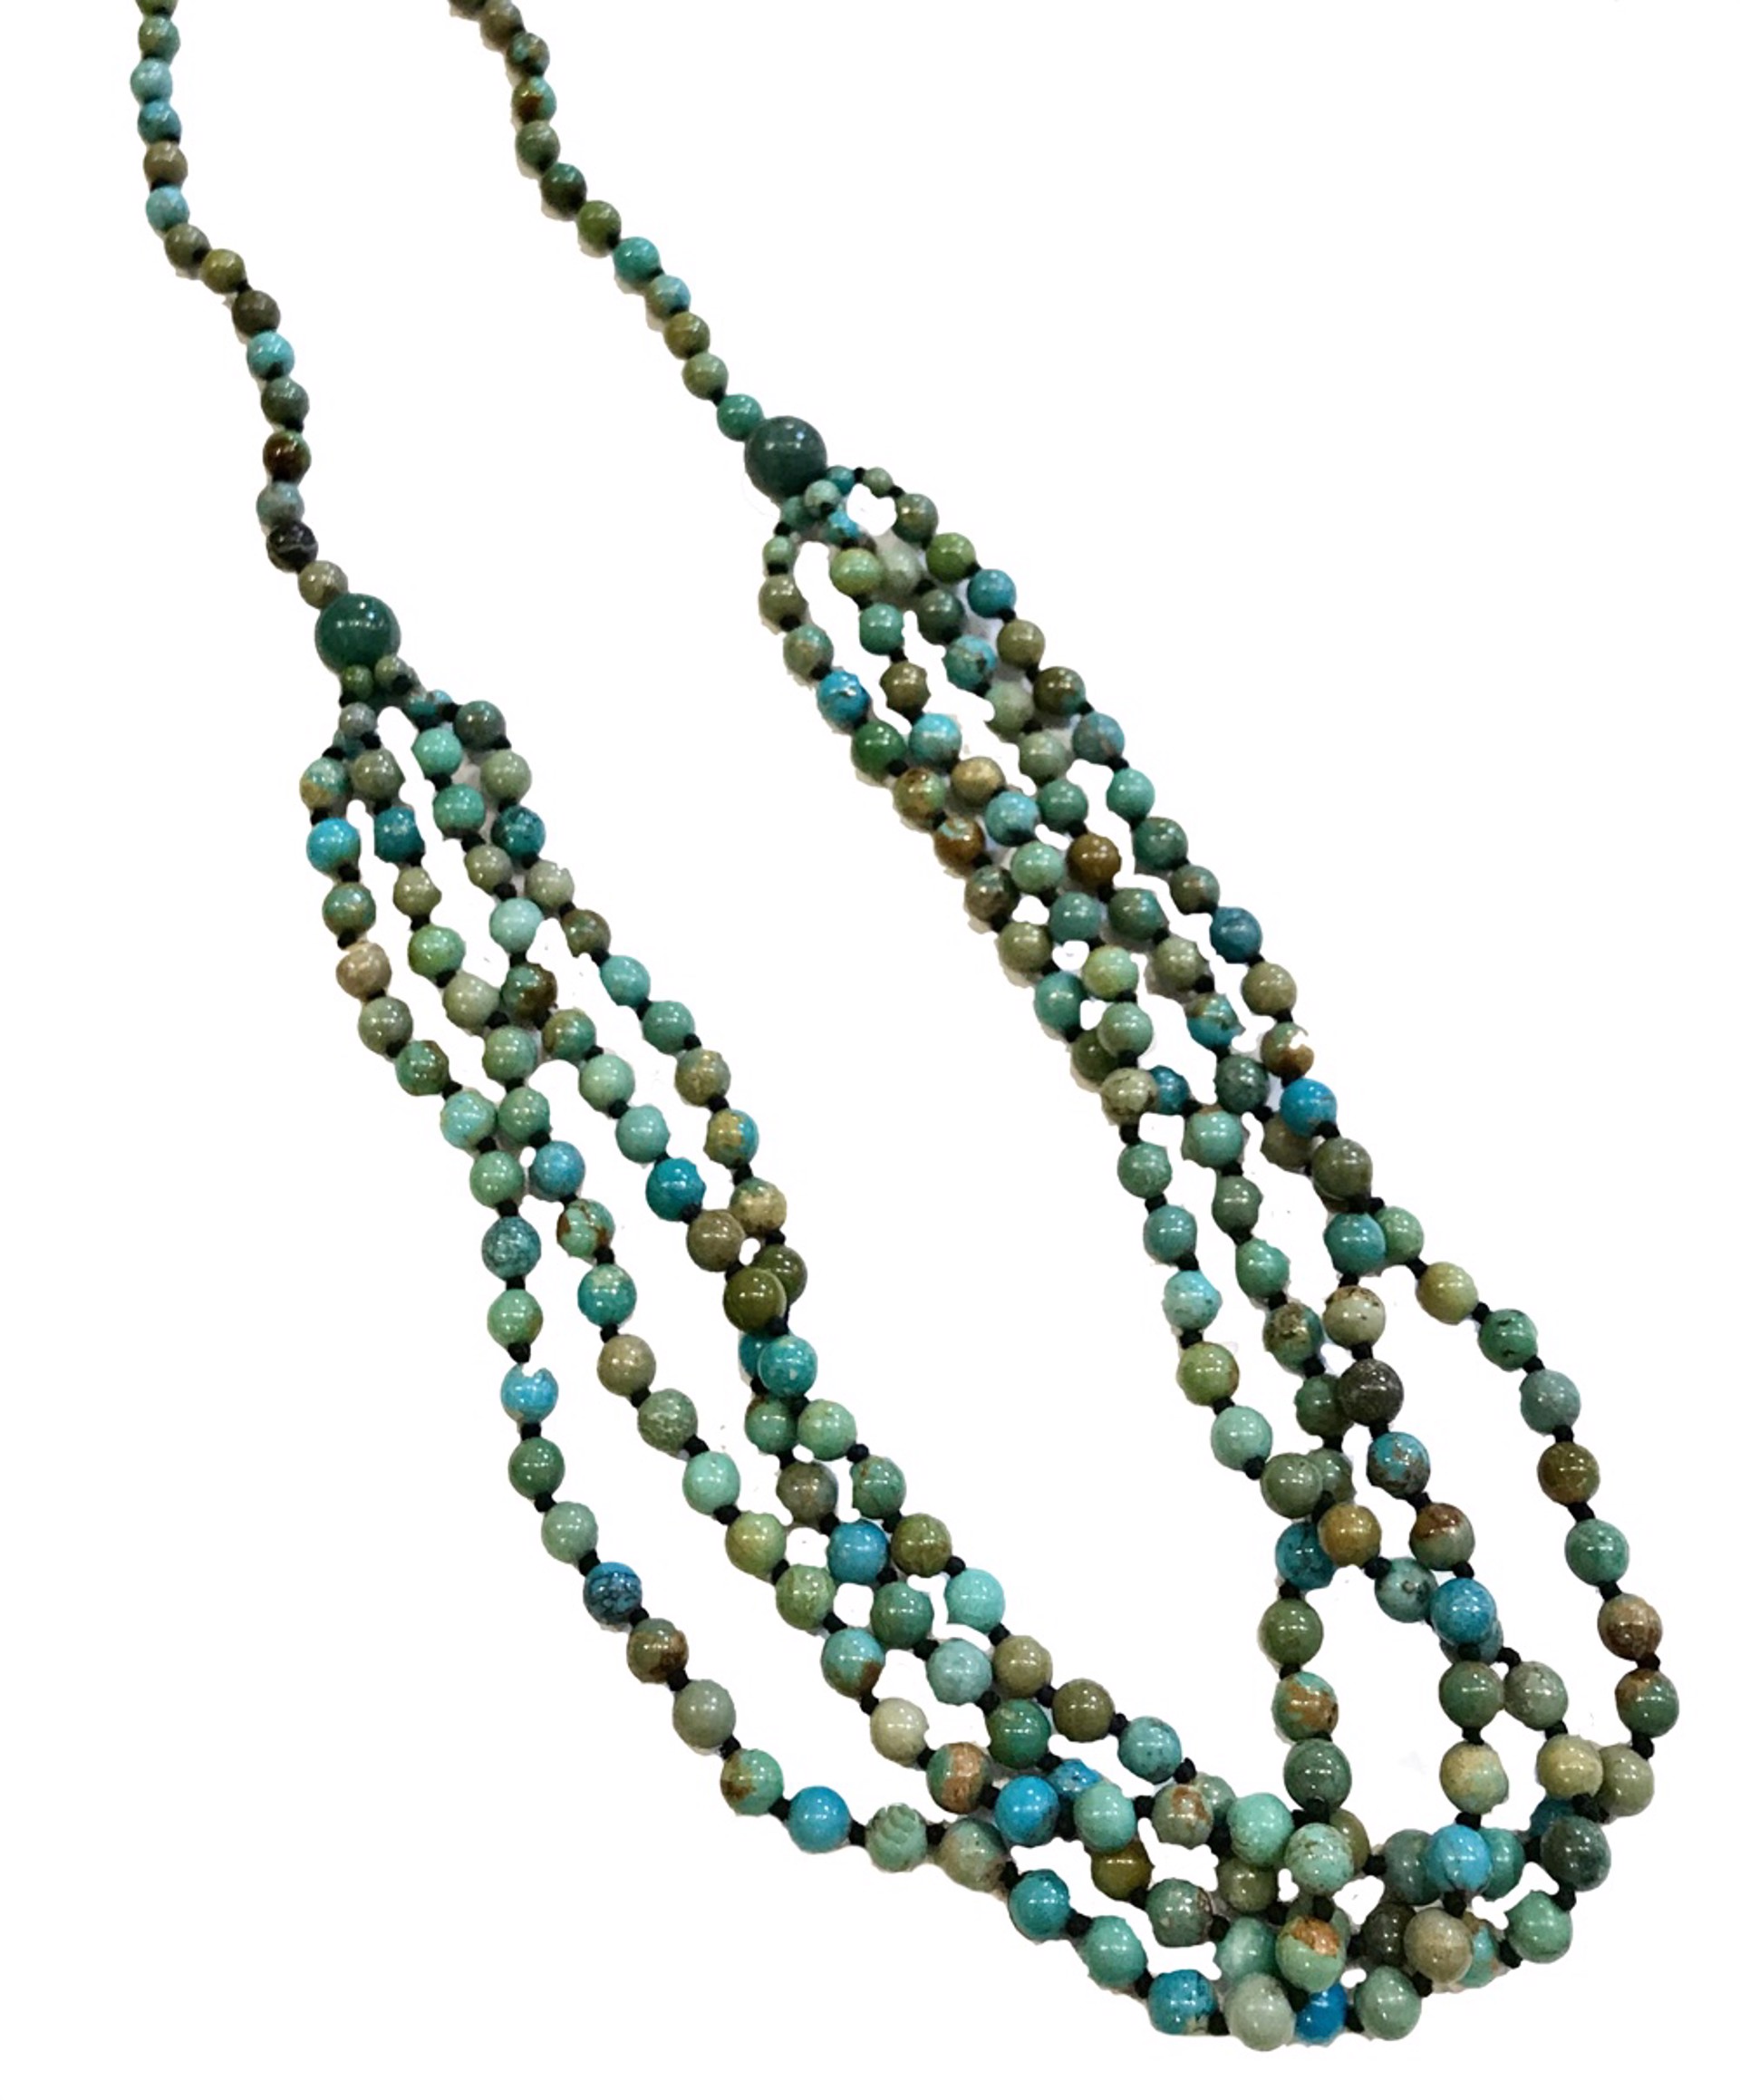 Necklace - 32" 4 Strand Turquoise Beads by Indigo Desert Ranch - Jewelry